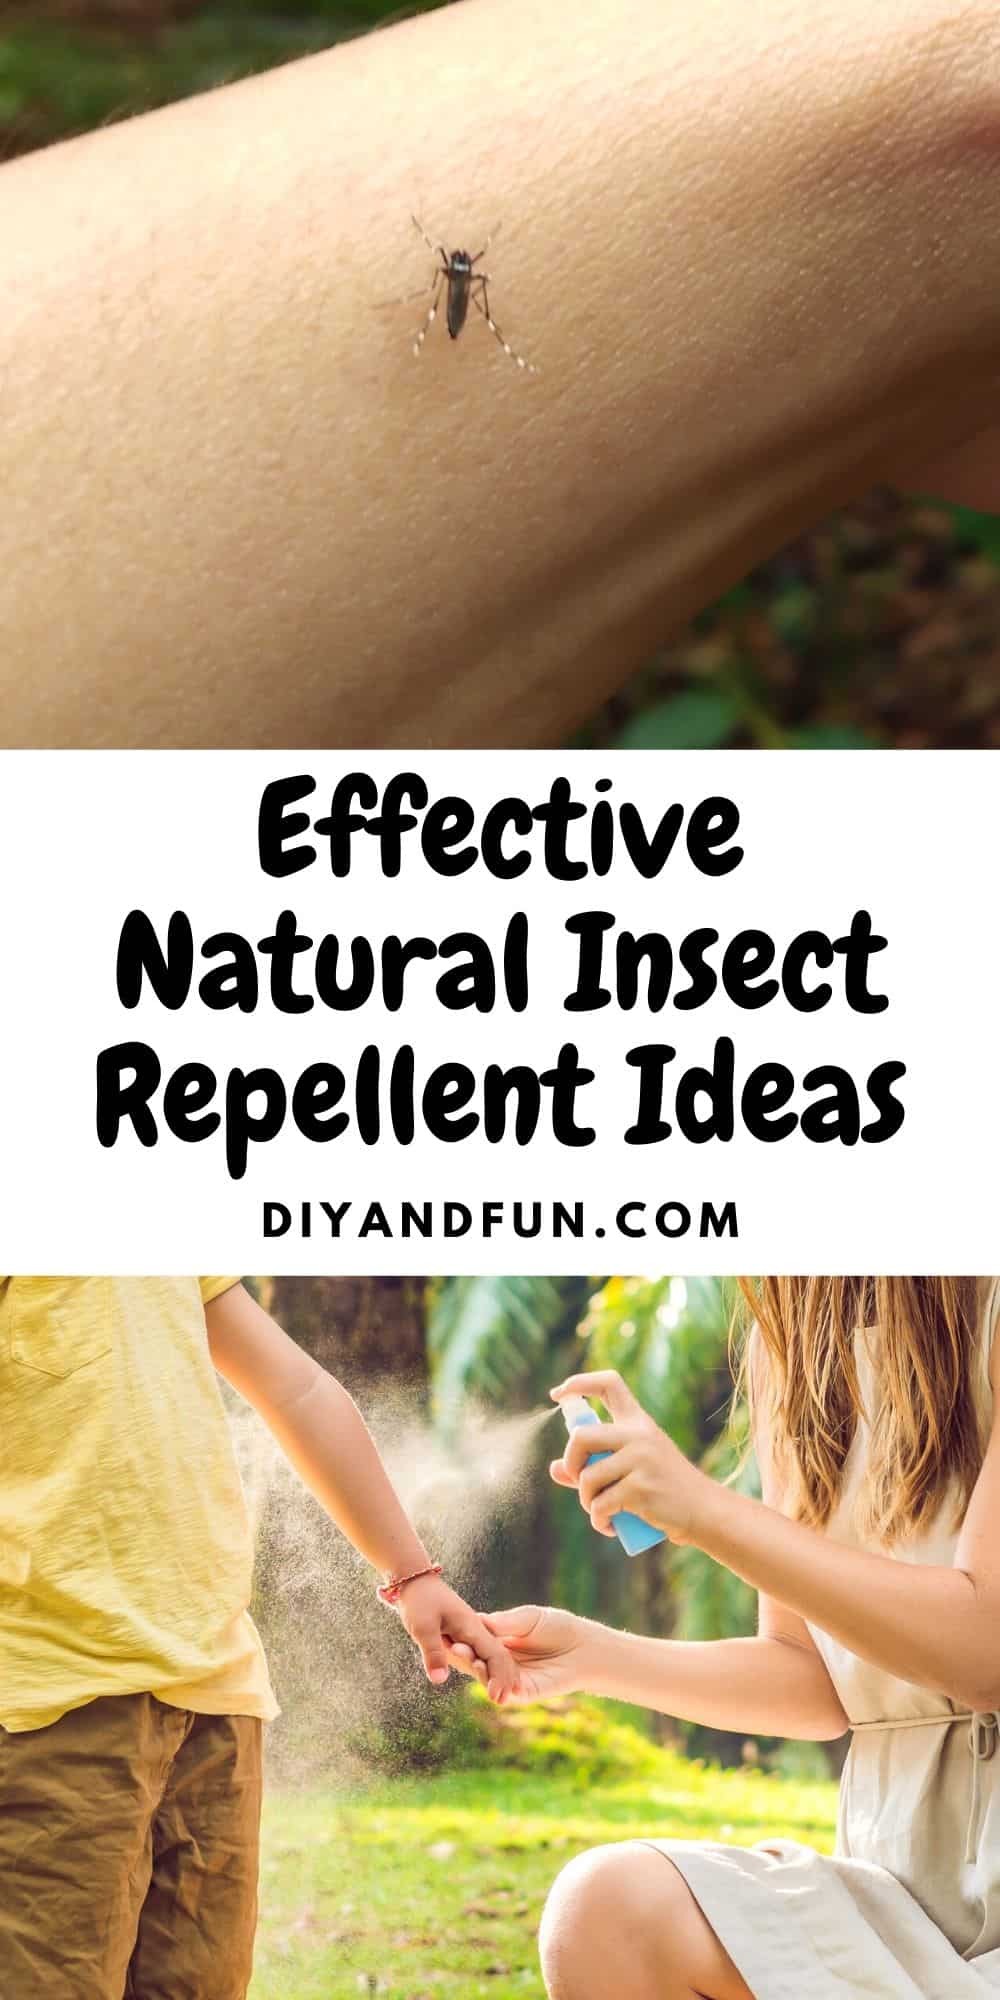 Effective Natural Insect Repellent Ideas, a simple DIY guide for making your own homemade repellents for bugs.